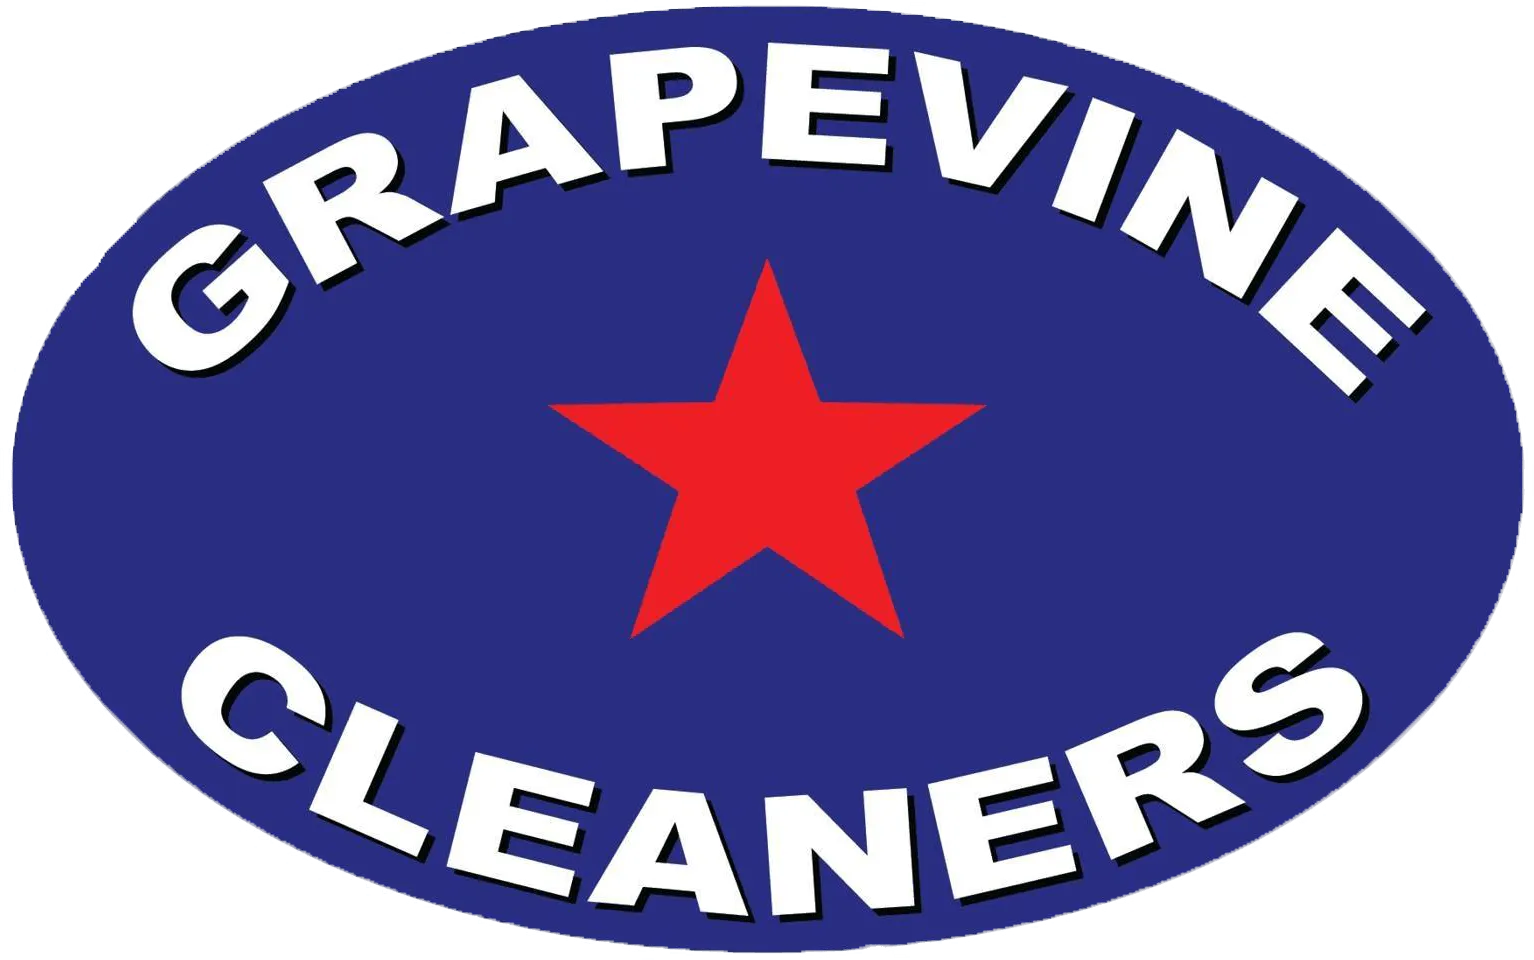 Grapevine Cleaners